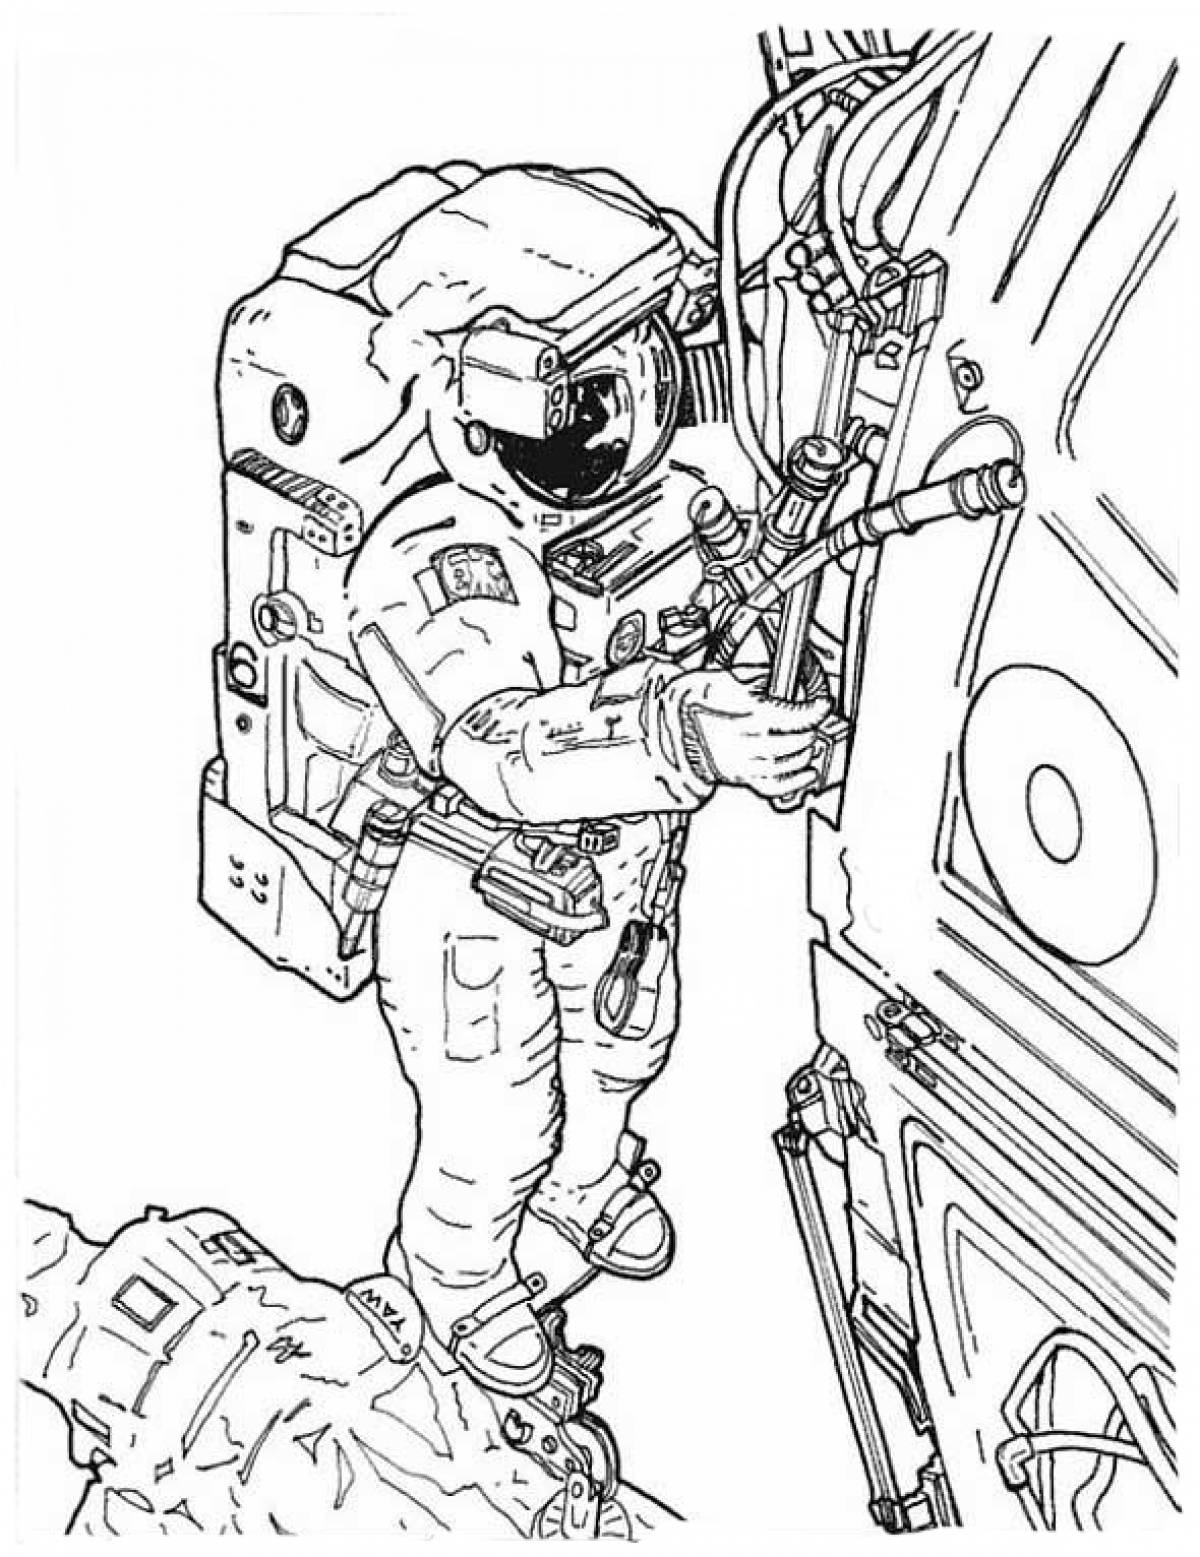 Astronaut and spaceship